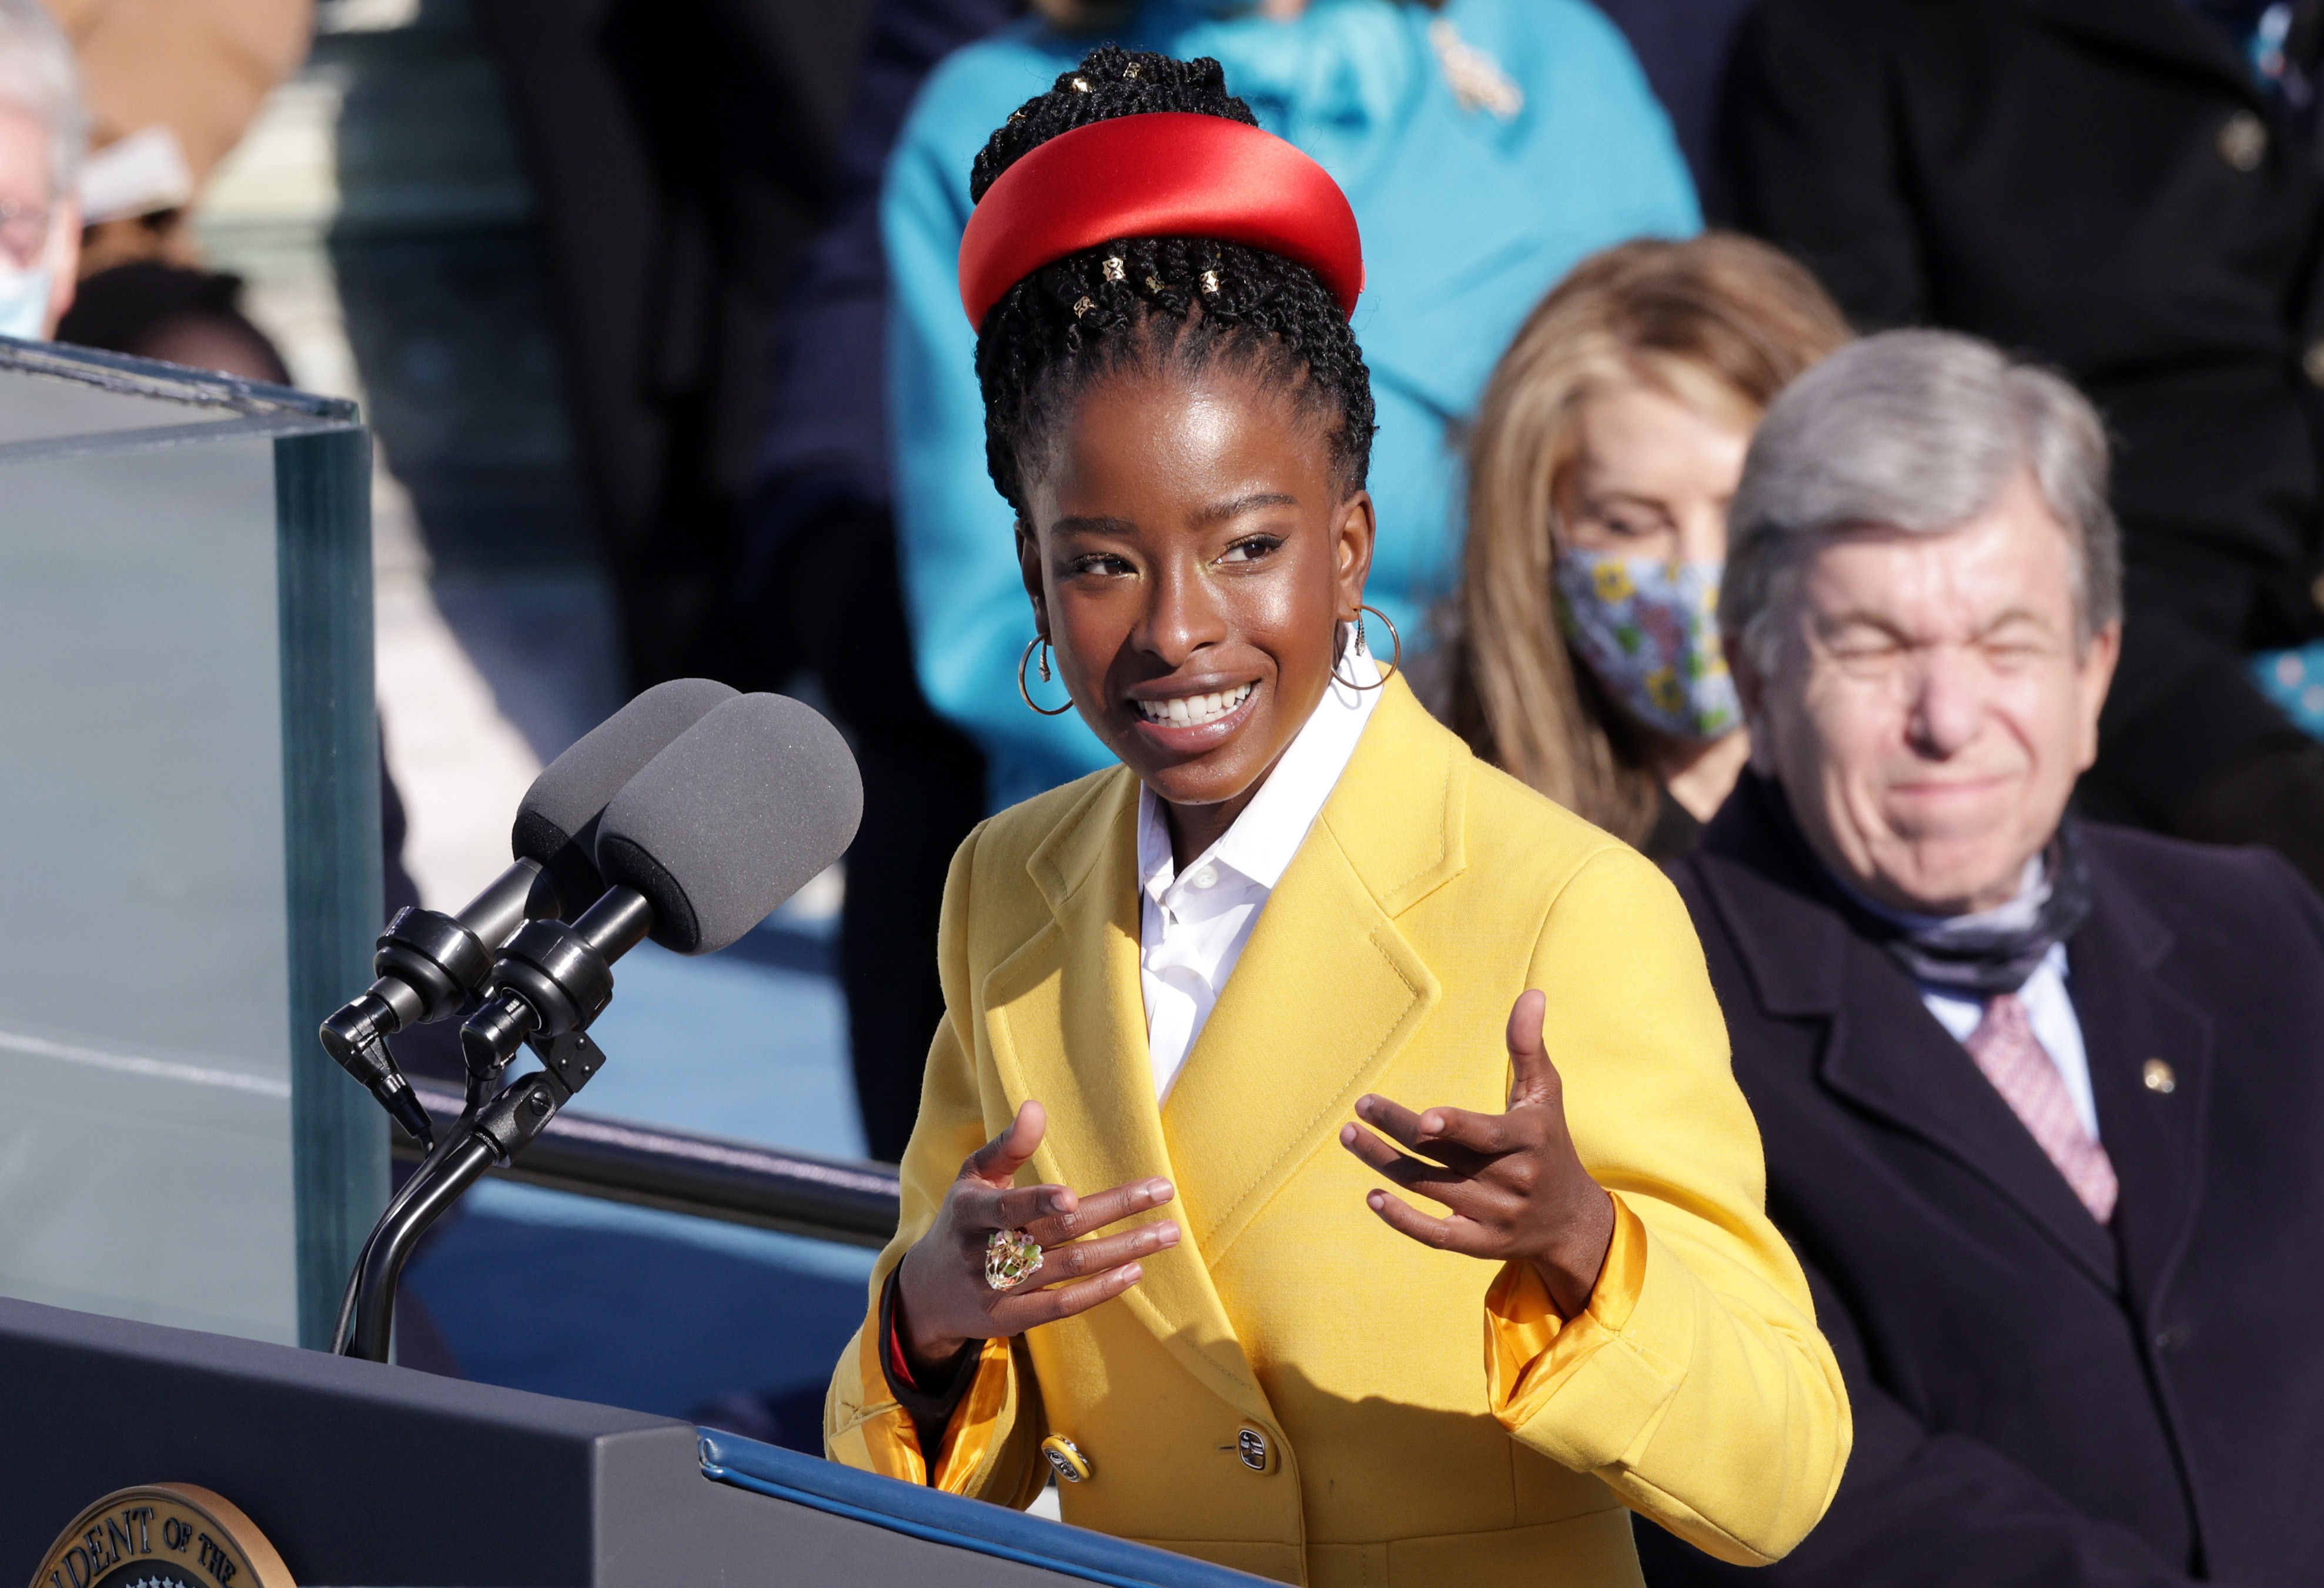 WASHINGTON, DC - JANUARY 20: Youth Poet Laureate Amanda Gorman speaks at the inauguration of U.S. President Joe Biden on the West Front of the U.S. Capitol on January 20, 2021 in Washington, DC.  During today's inauguration ceremony Joe Biden becomes the  (Foto: Getty Images)